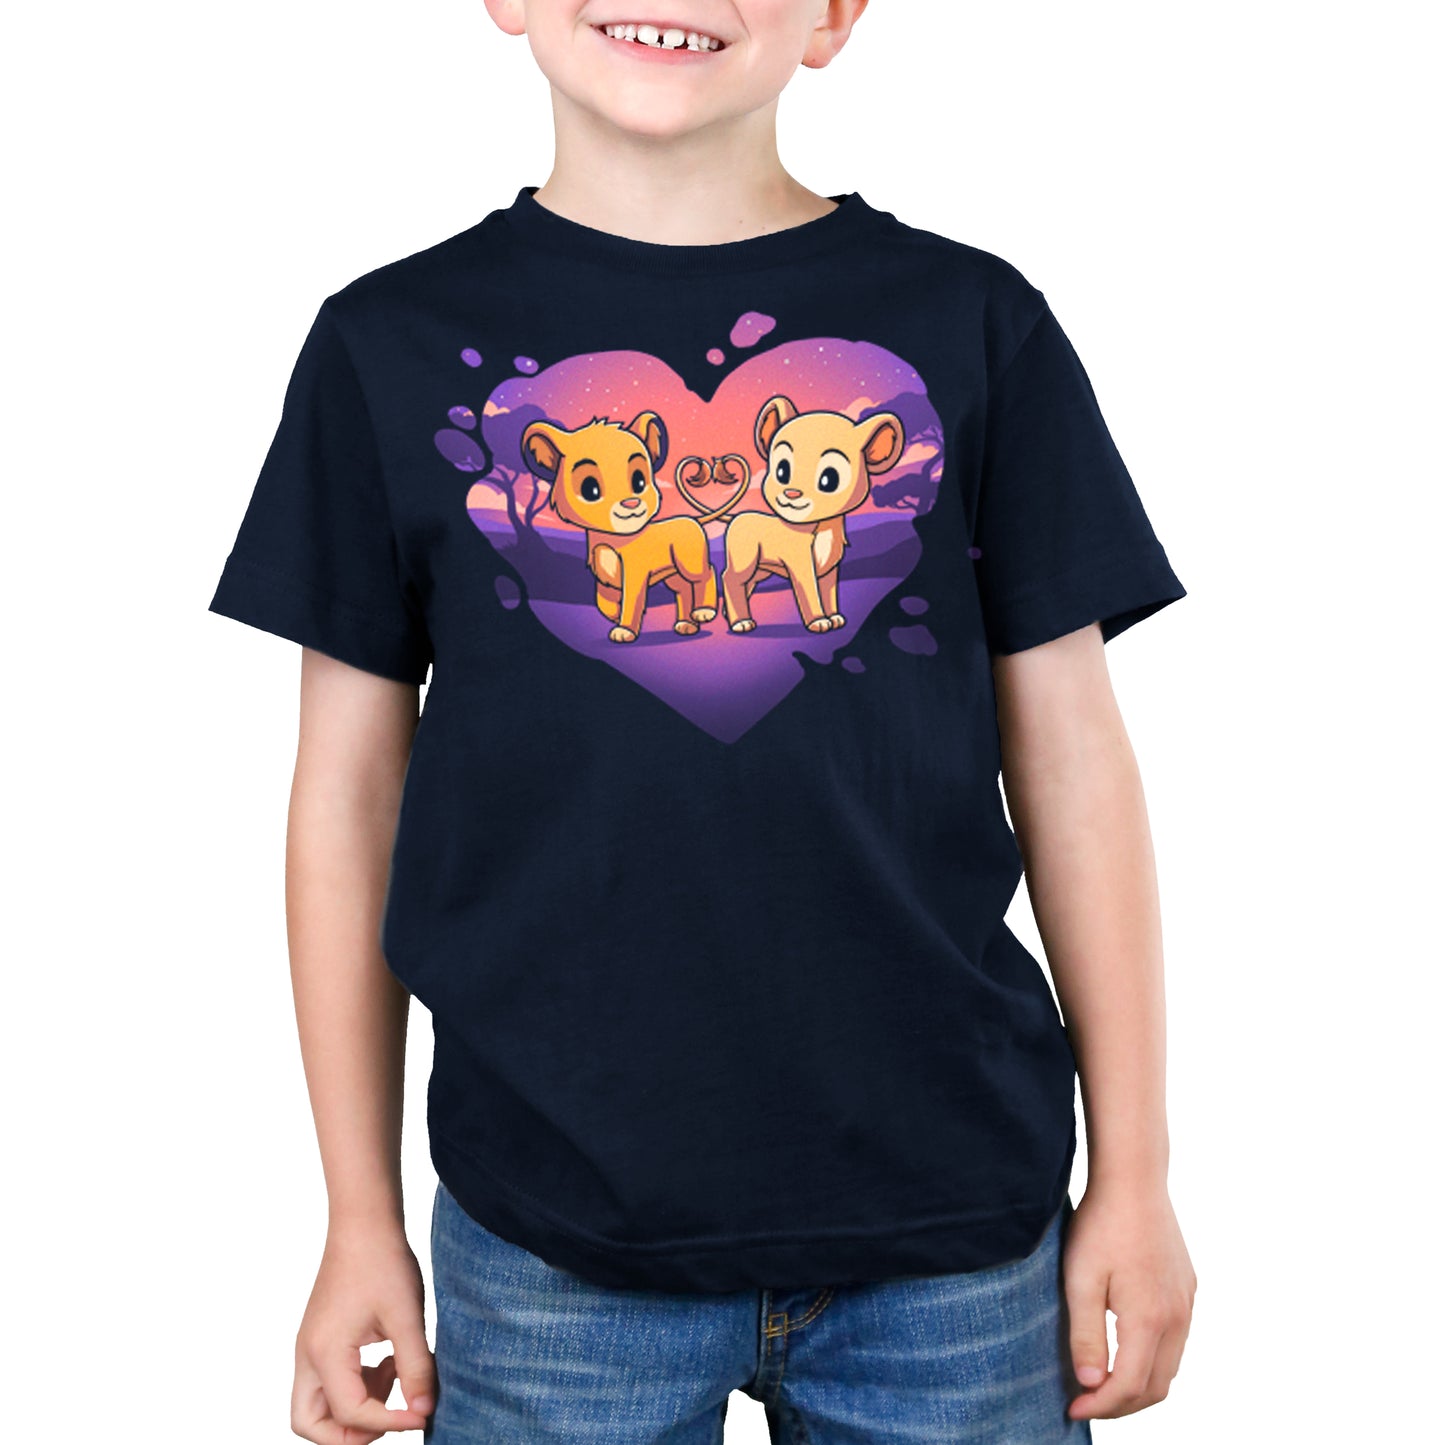 A young boy wearing a Disney Lion King t-shirt with two lion cubs named Simba and Nala in a heart.